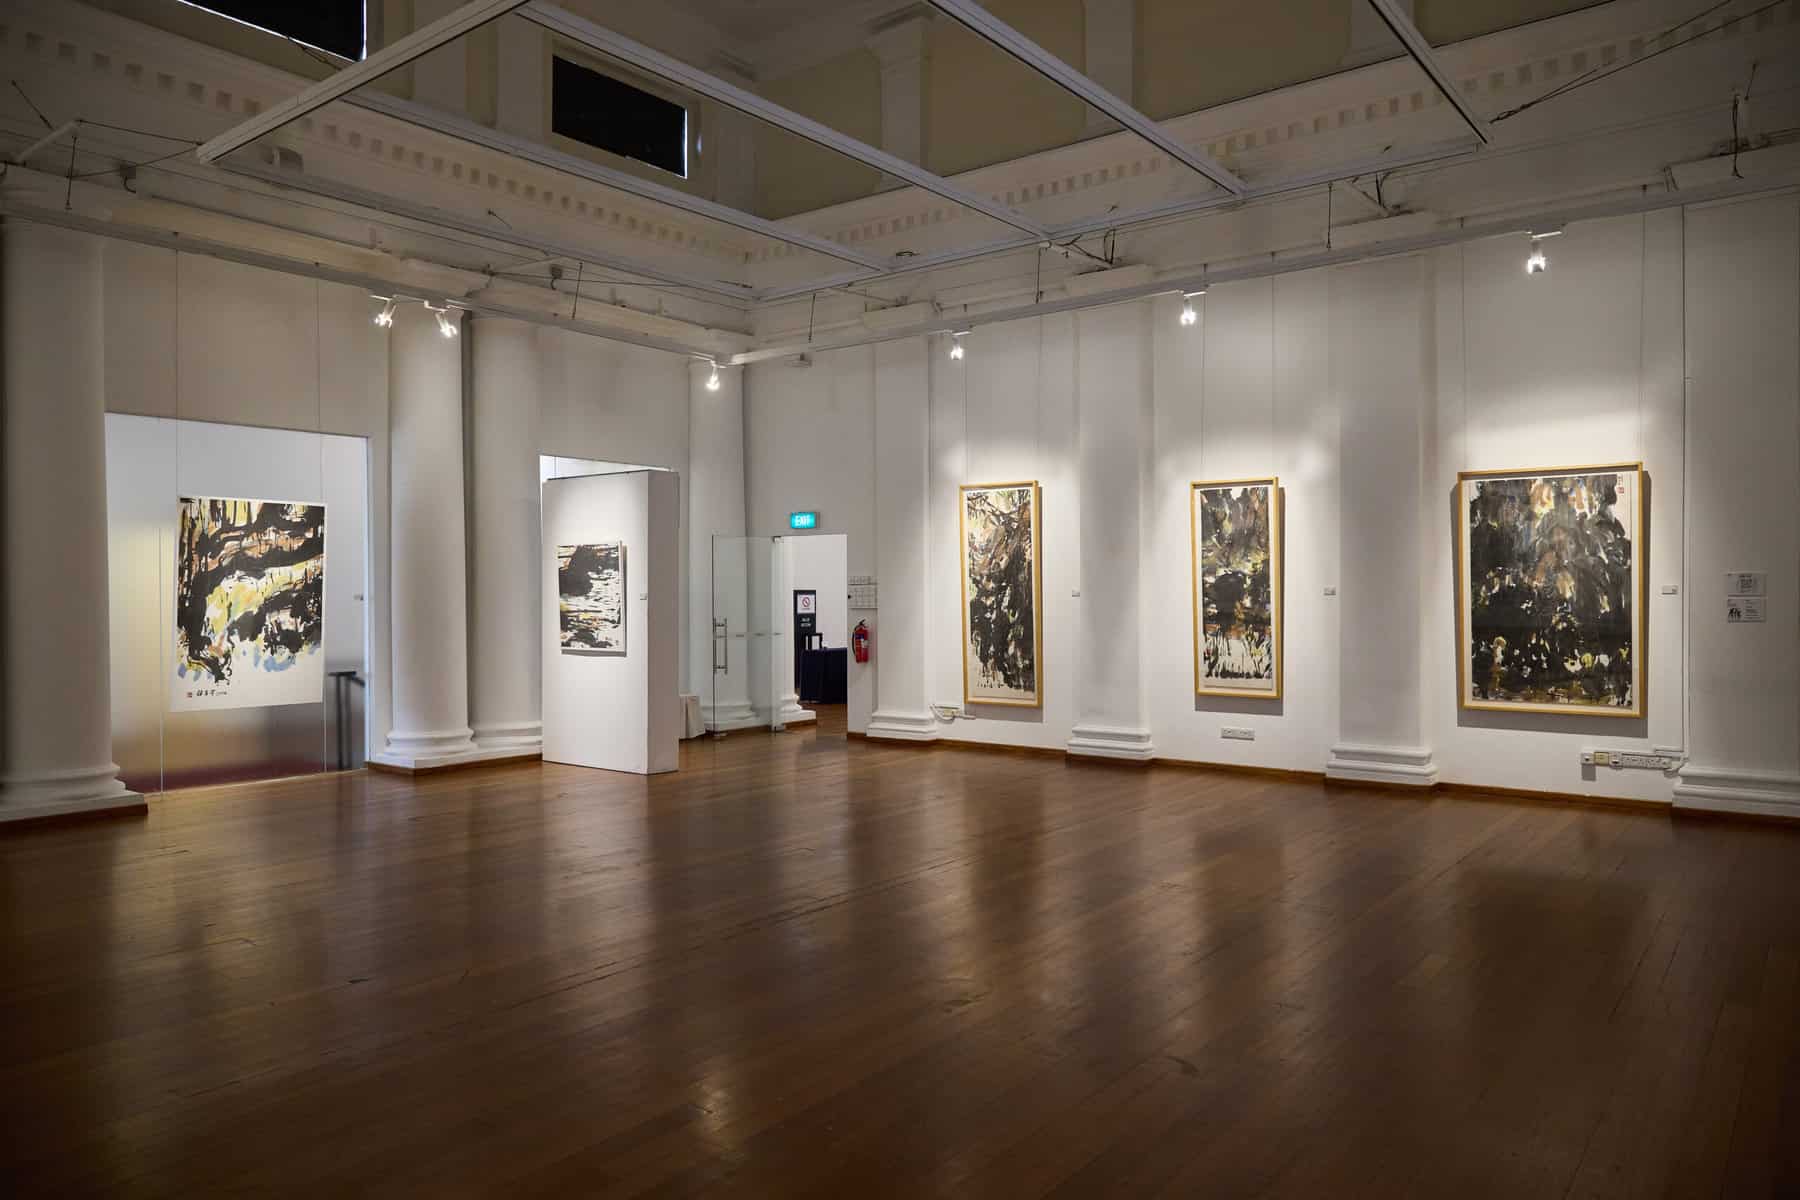 Exhibition view of Tree Spirit 森灵: Visions of the Arboreal. Image Courtesy of Not gallery.